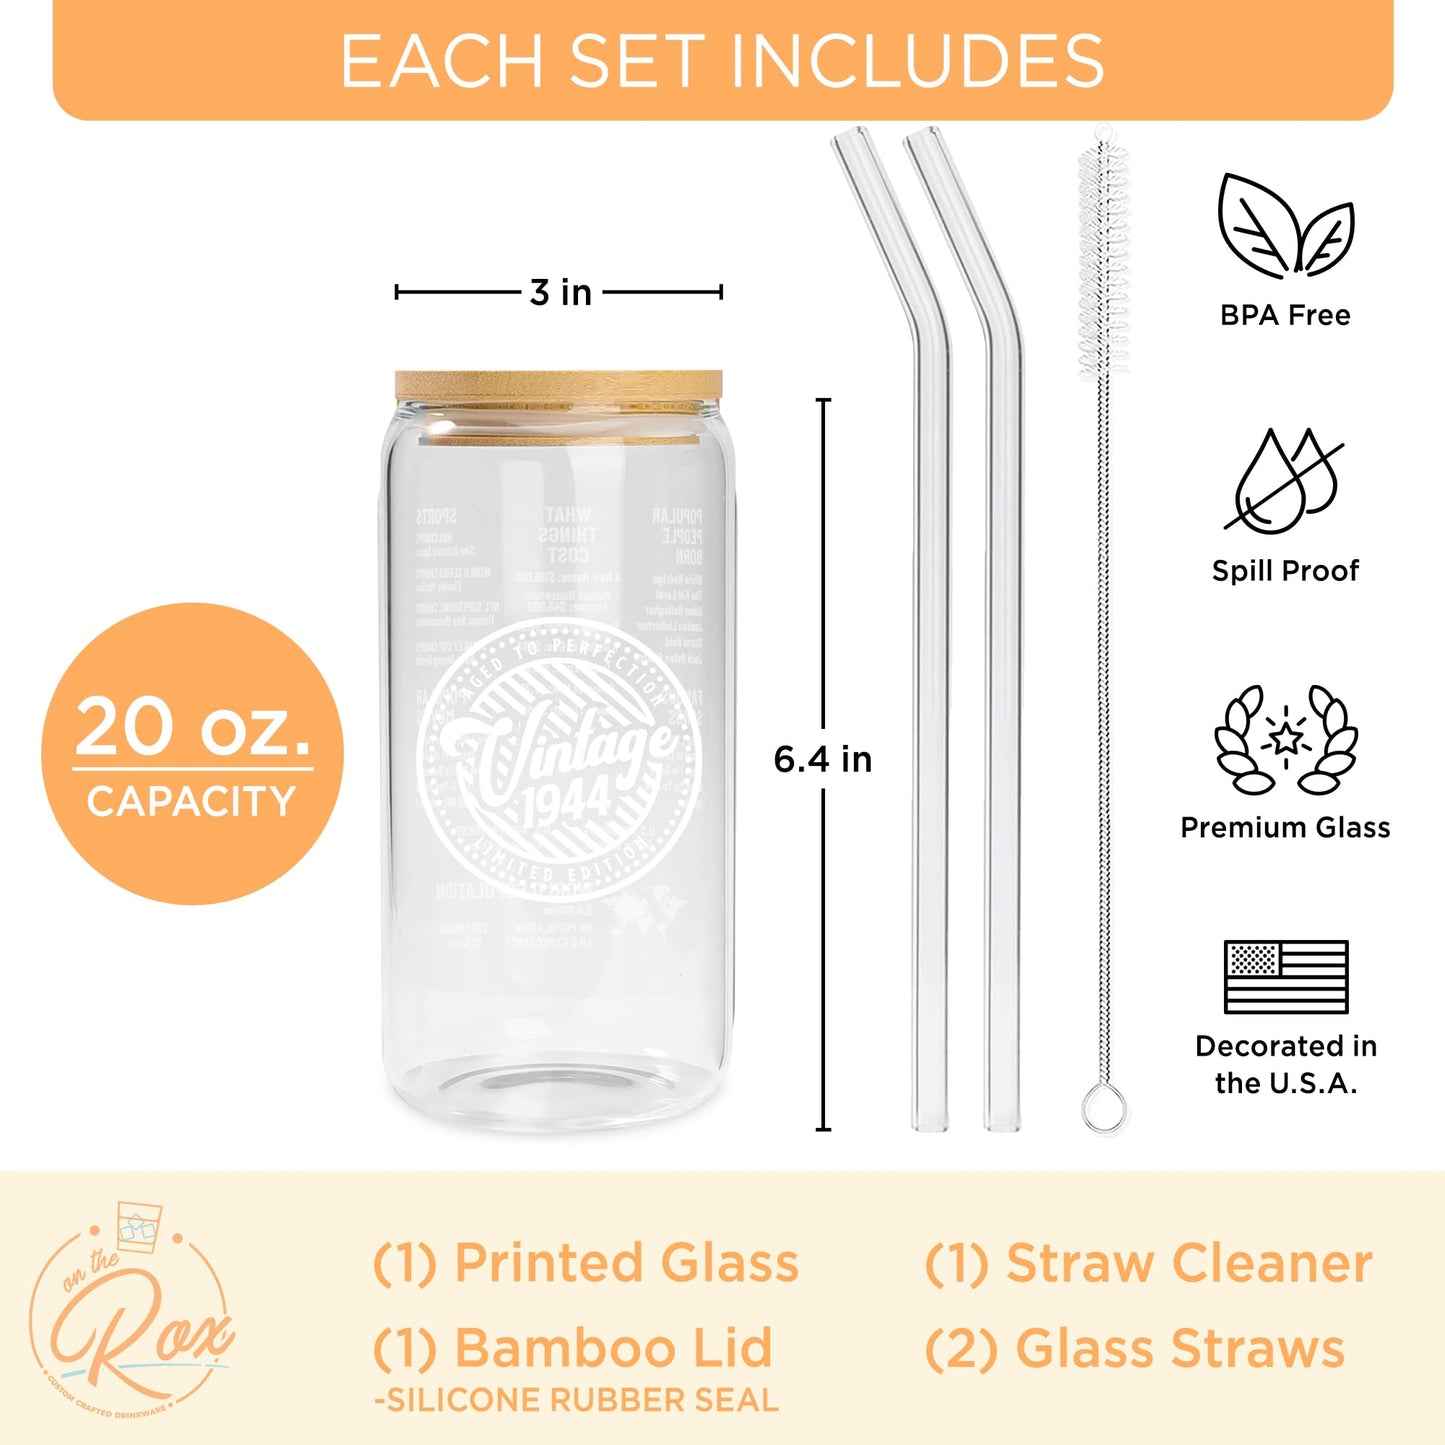 80th Birthday Gifts For Women - Vintage 1944 Soda Can Glass 20oz  w/ Bamboo Lid & Glass Straw Set - Aesthetic Birthday Gift